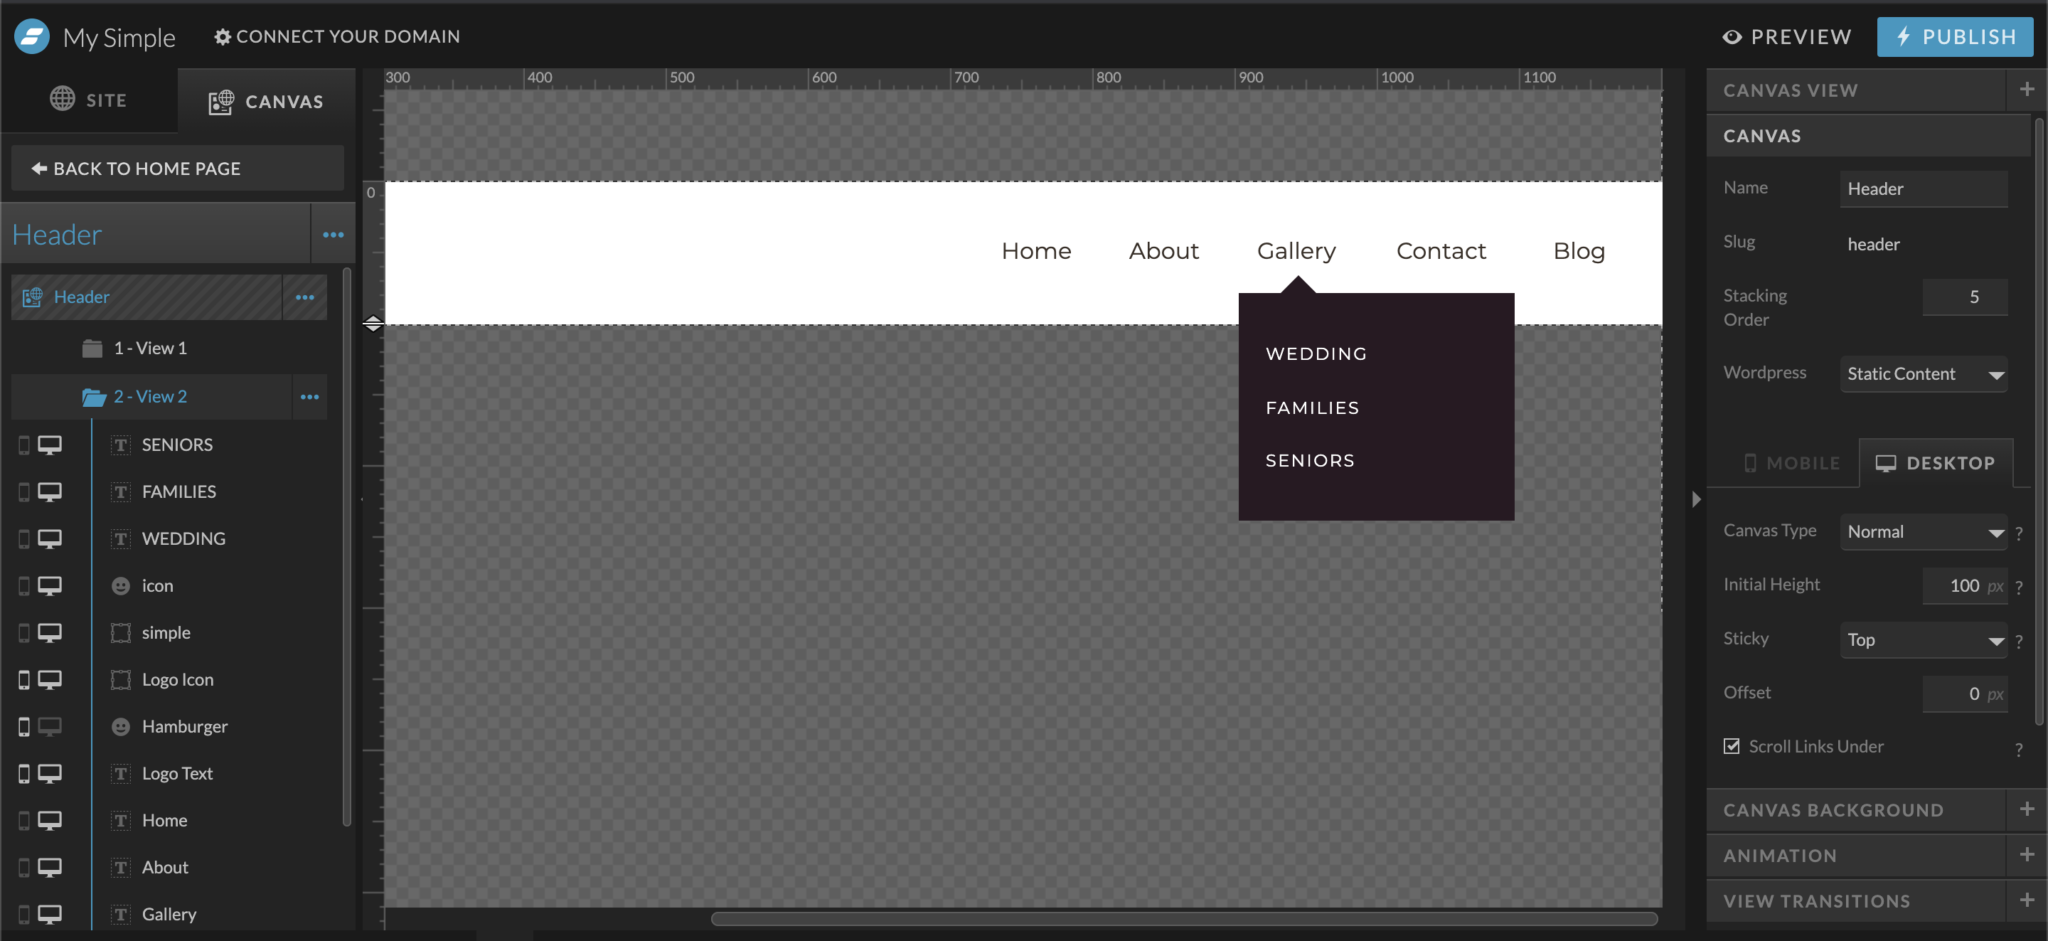 How to Create a Simple Dropdown Menu on Showit